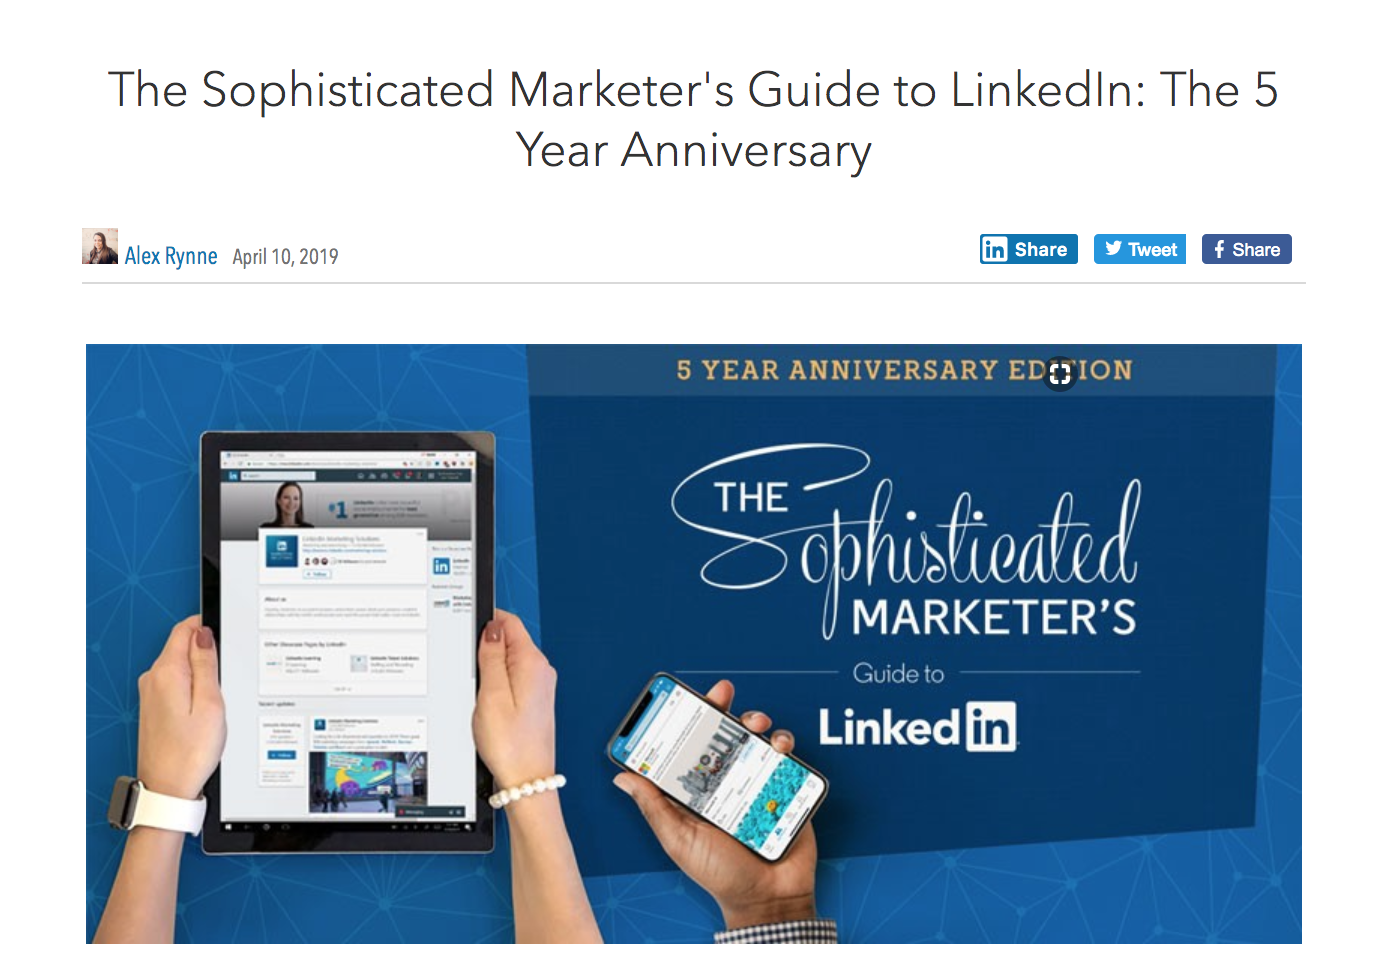 LinkedIn Relaunches The Sophisticated Marketers' Guide